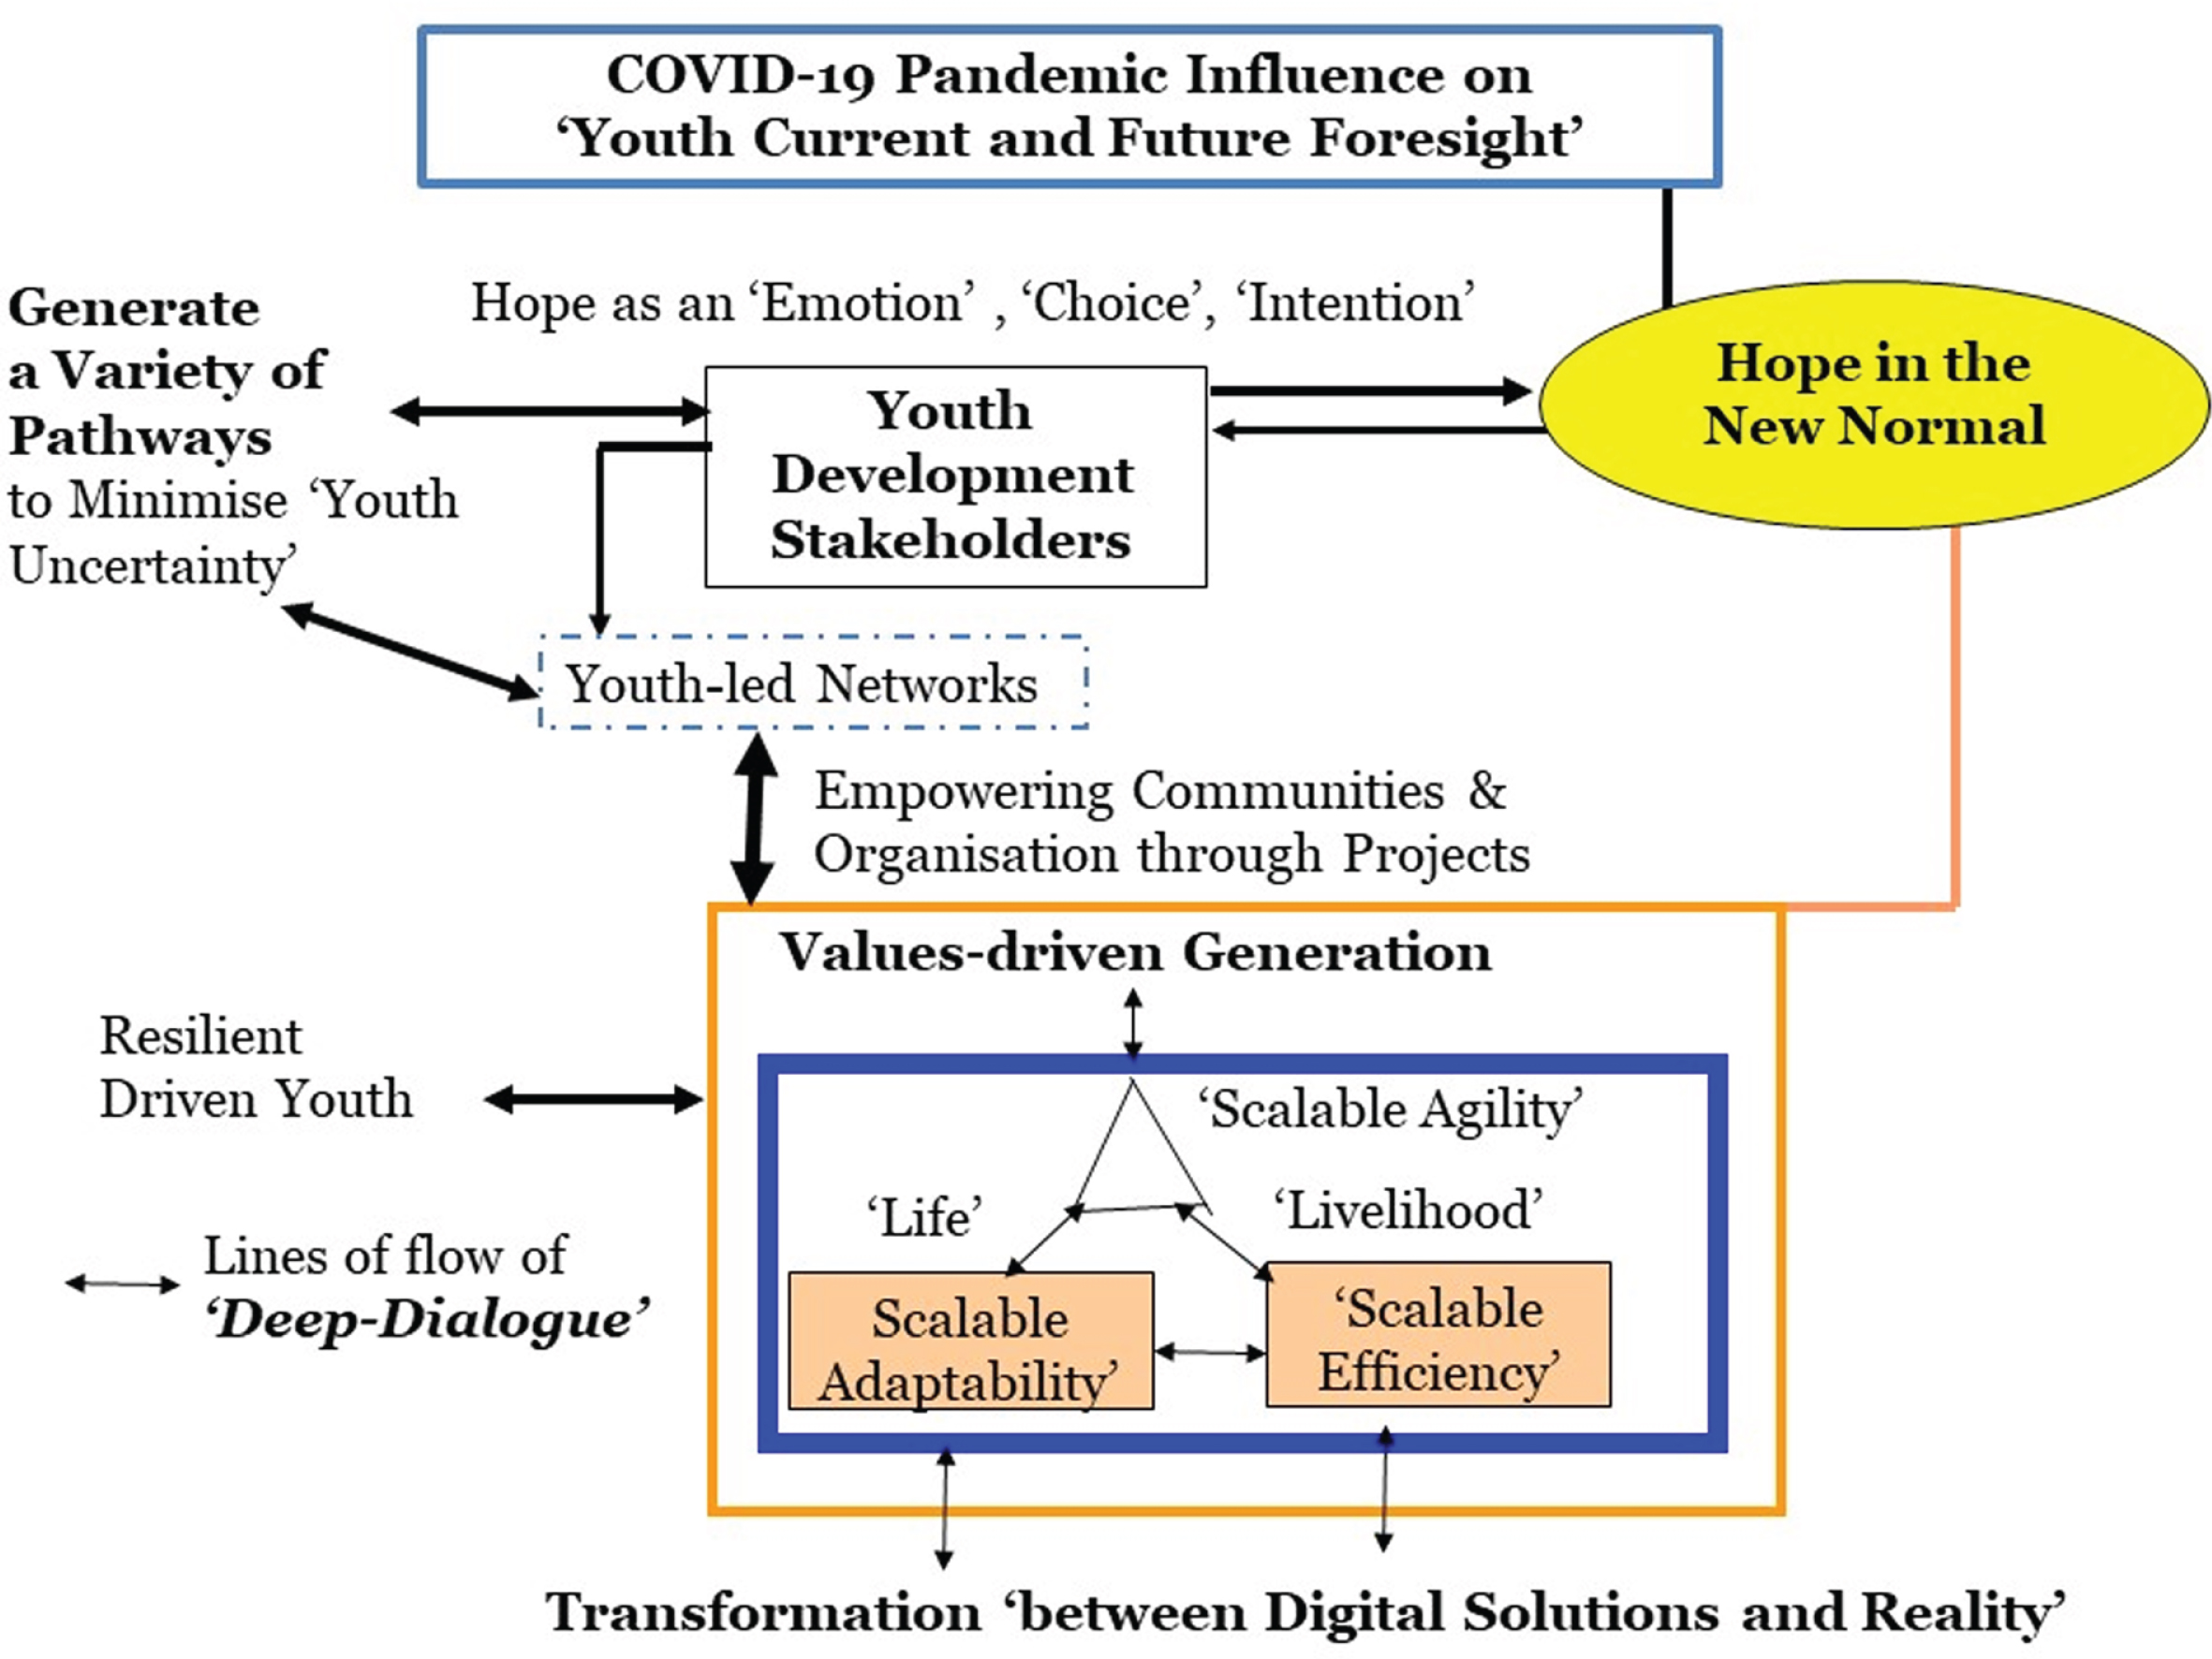 Communication Model for Optimising Youth Readiness and Influence in the New Normal.